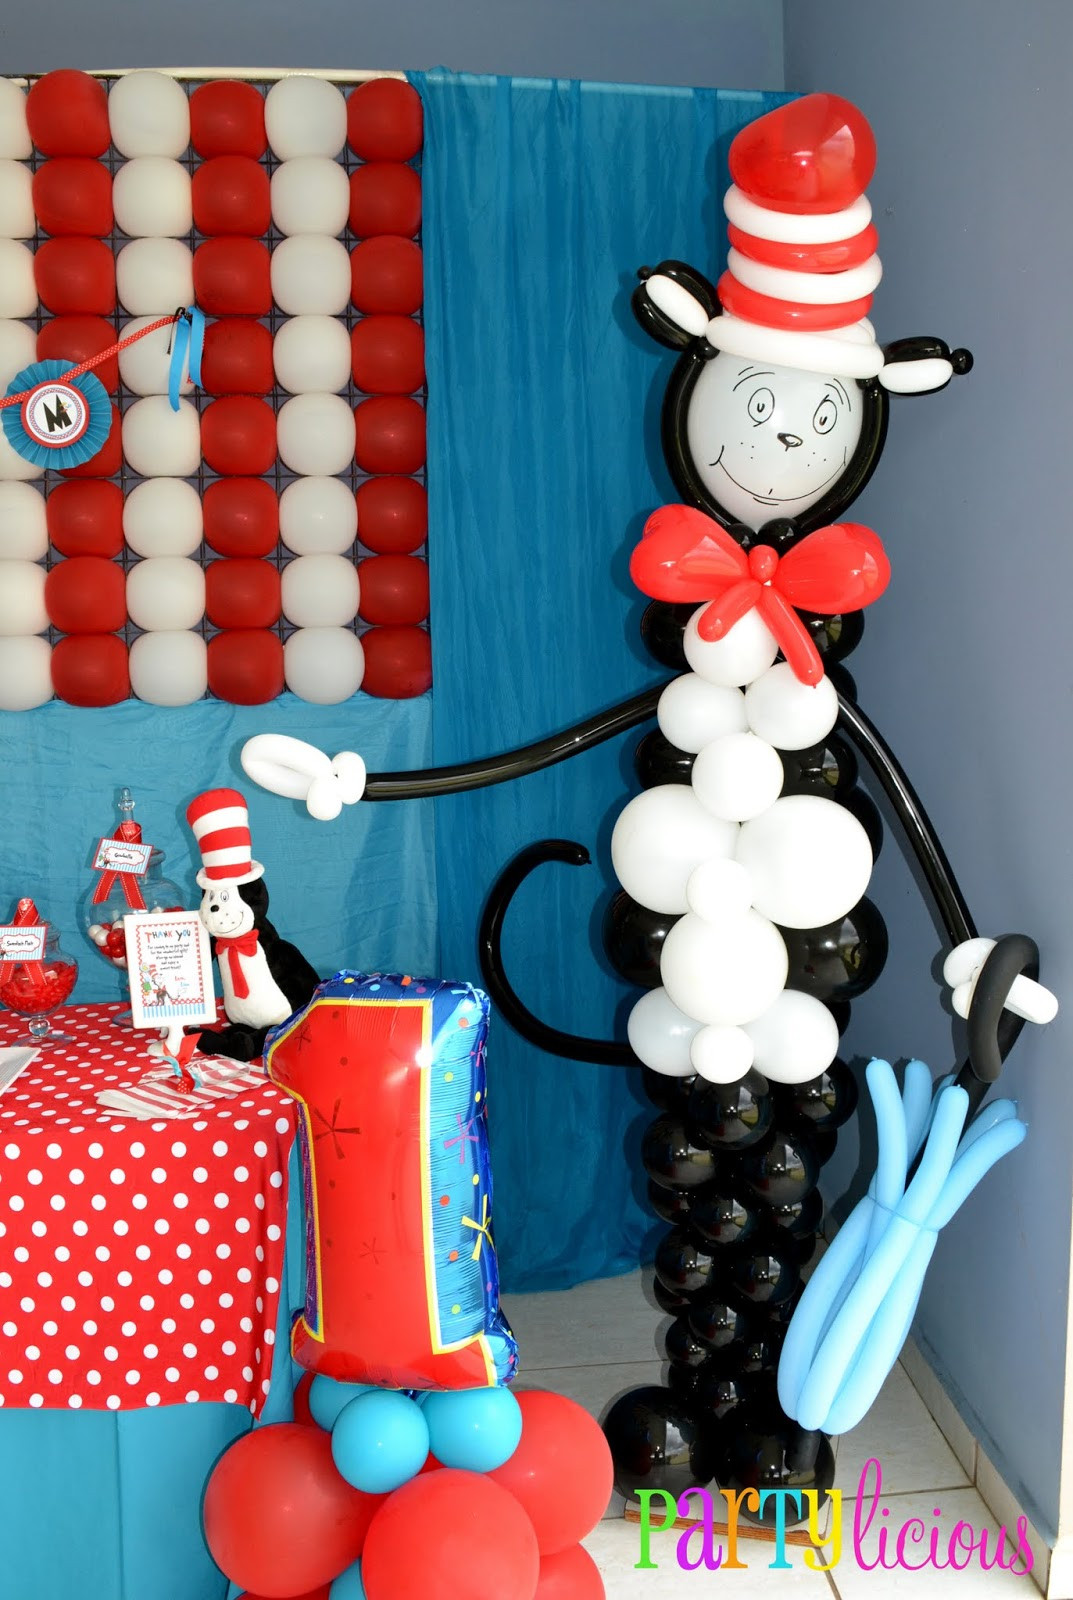 Cat In The Hat Birthday Party Ideas
 Partylicious Events PR The Cat in the Hat 1st Birthday